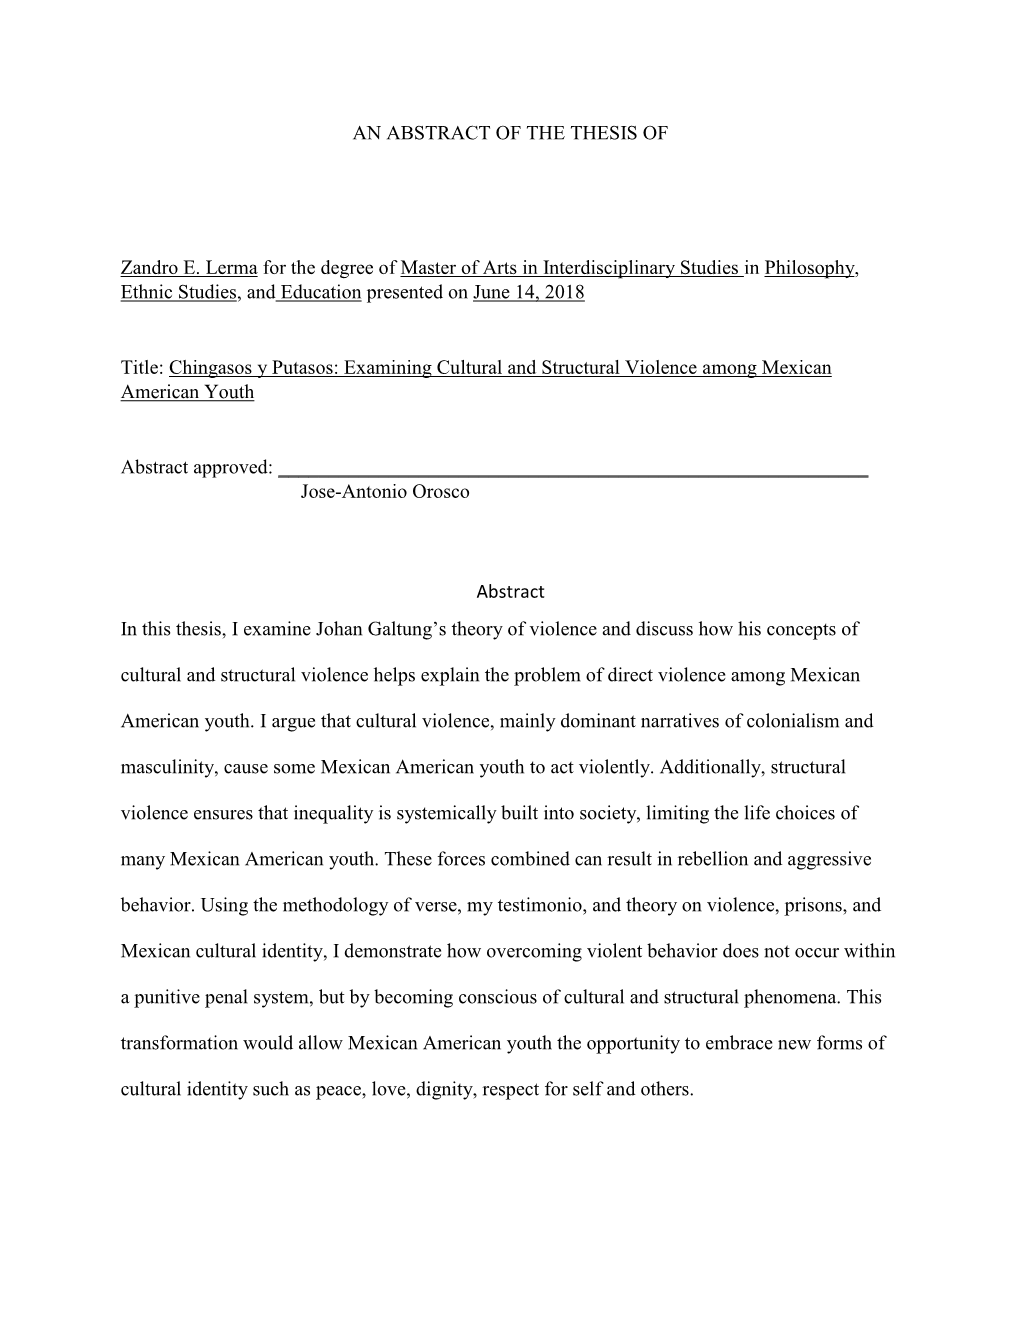 AN ABSTRACT of the THESIS of Zandro E